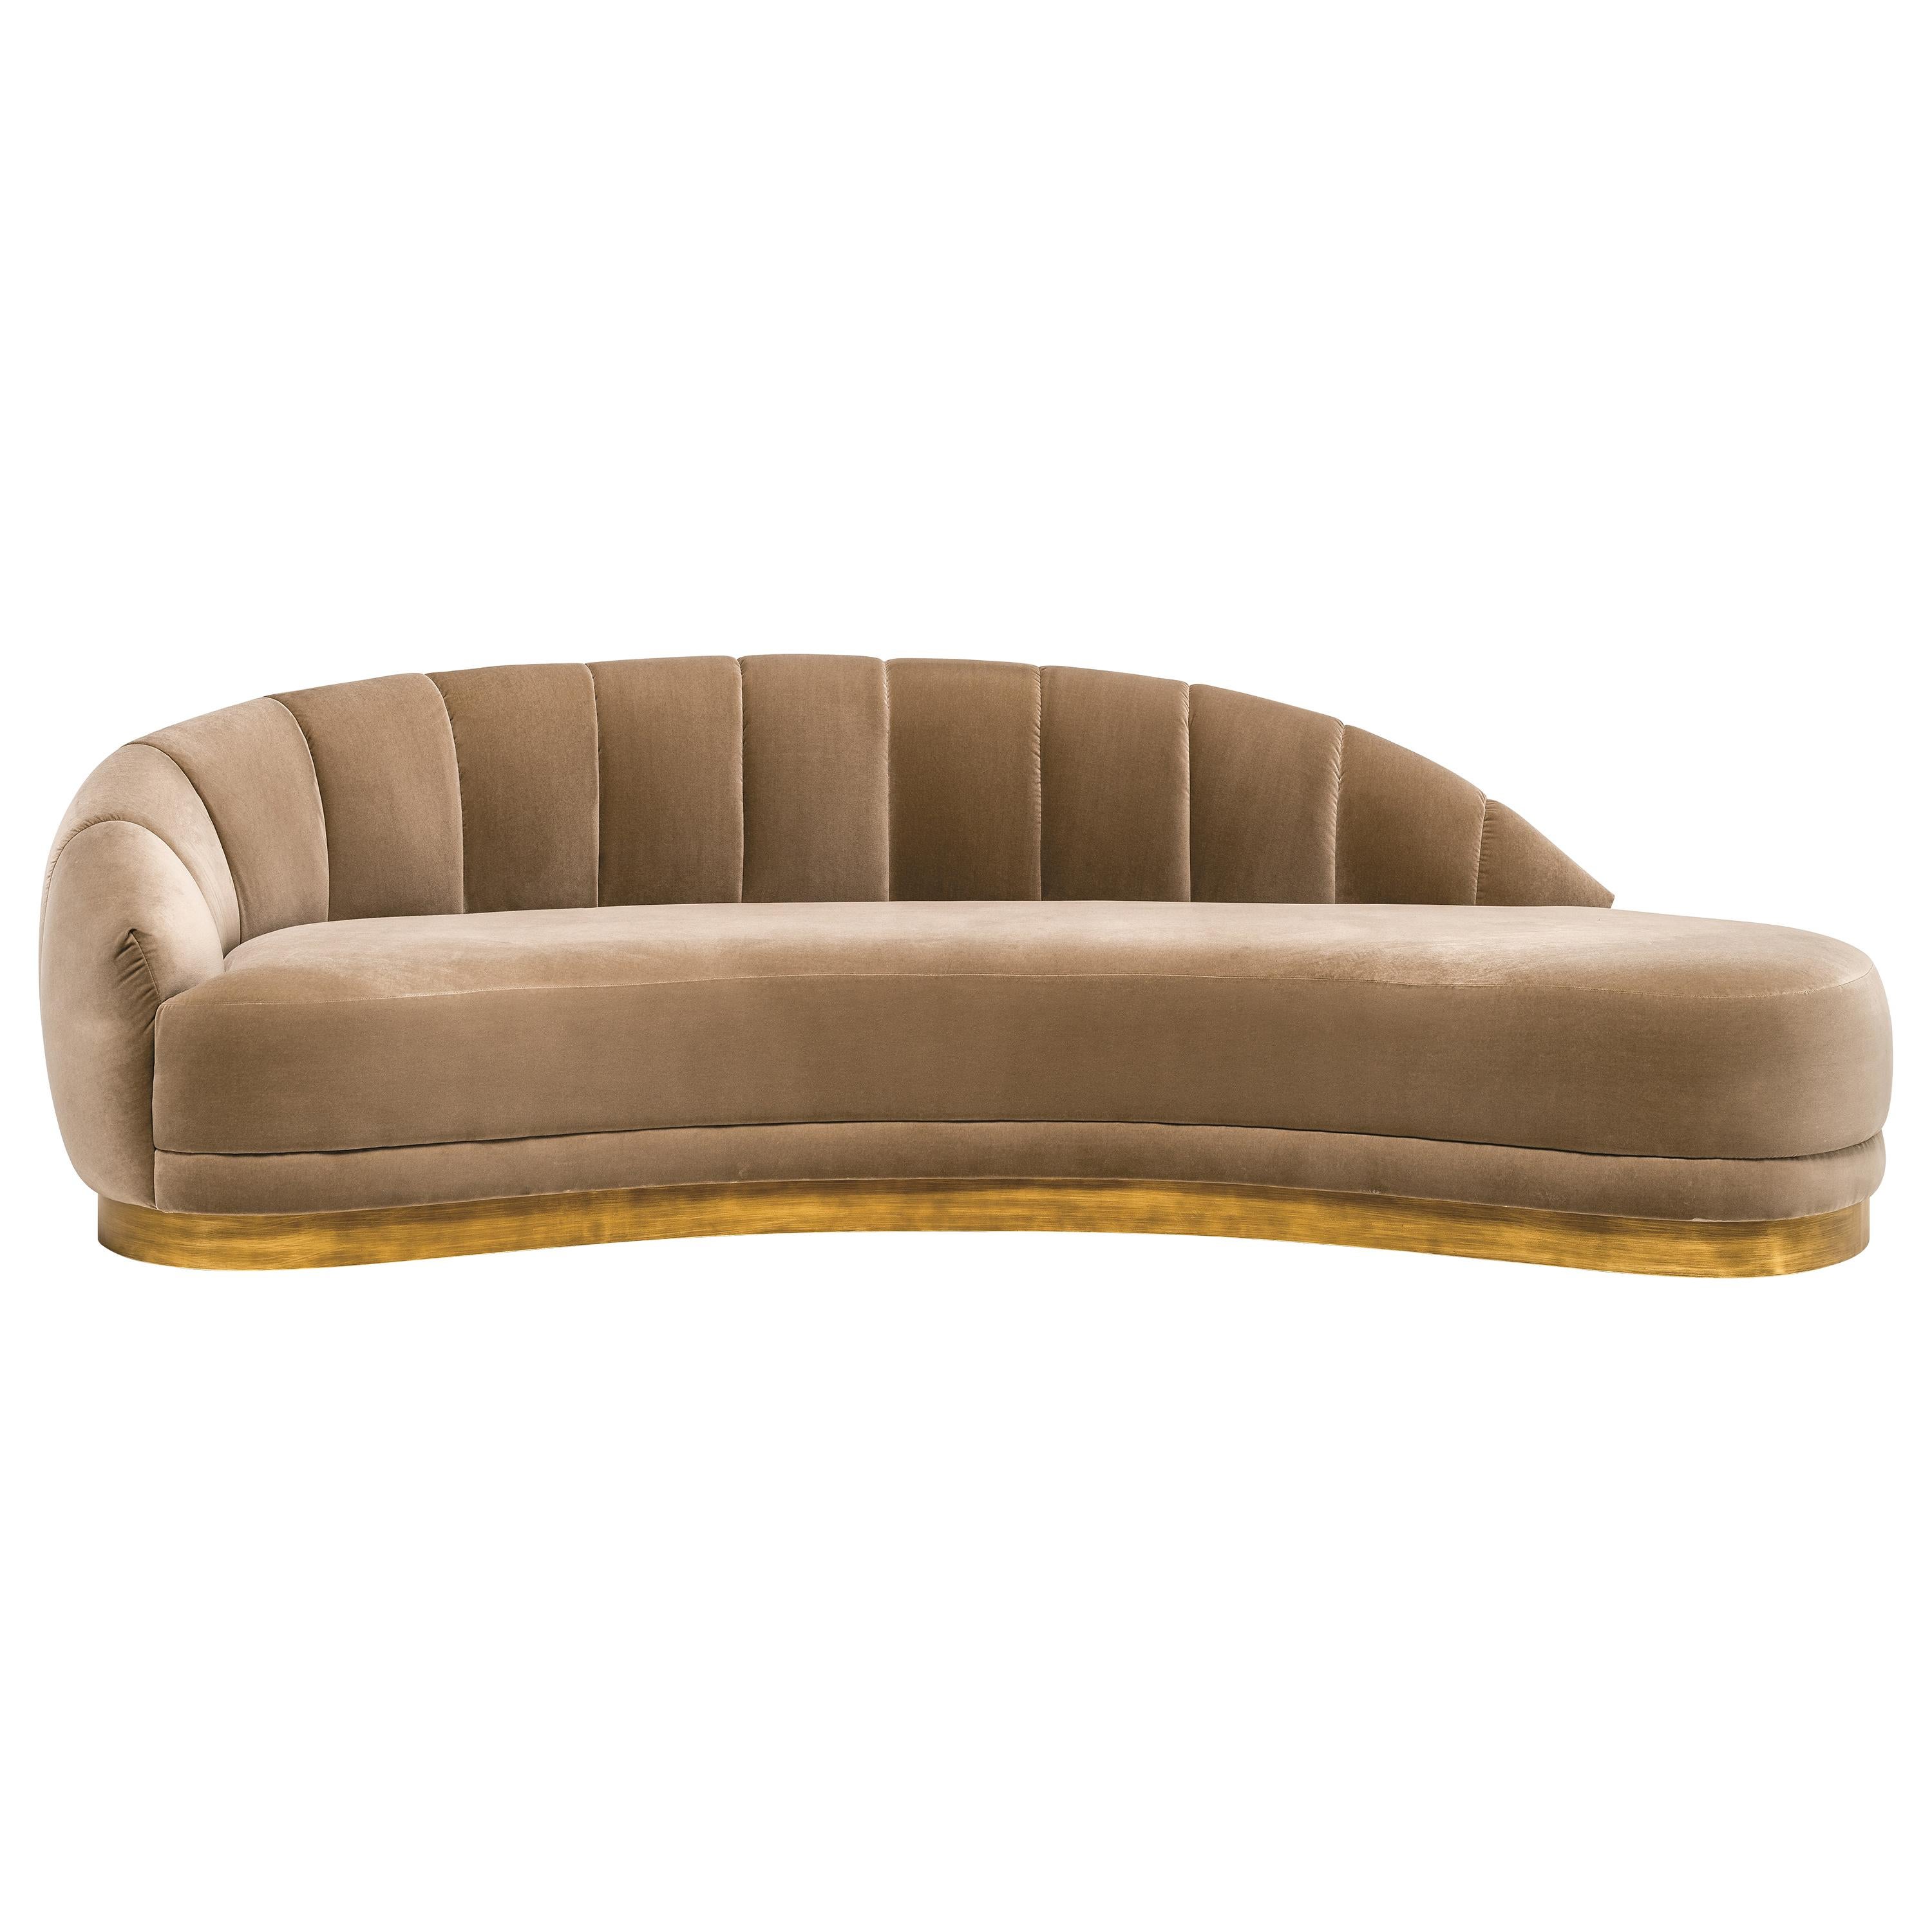 Hand-Tailored Retro Style Sofa, Channel Tufted Velvet For Sale